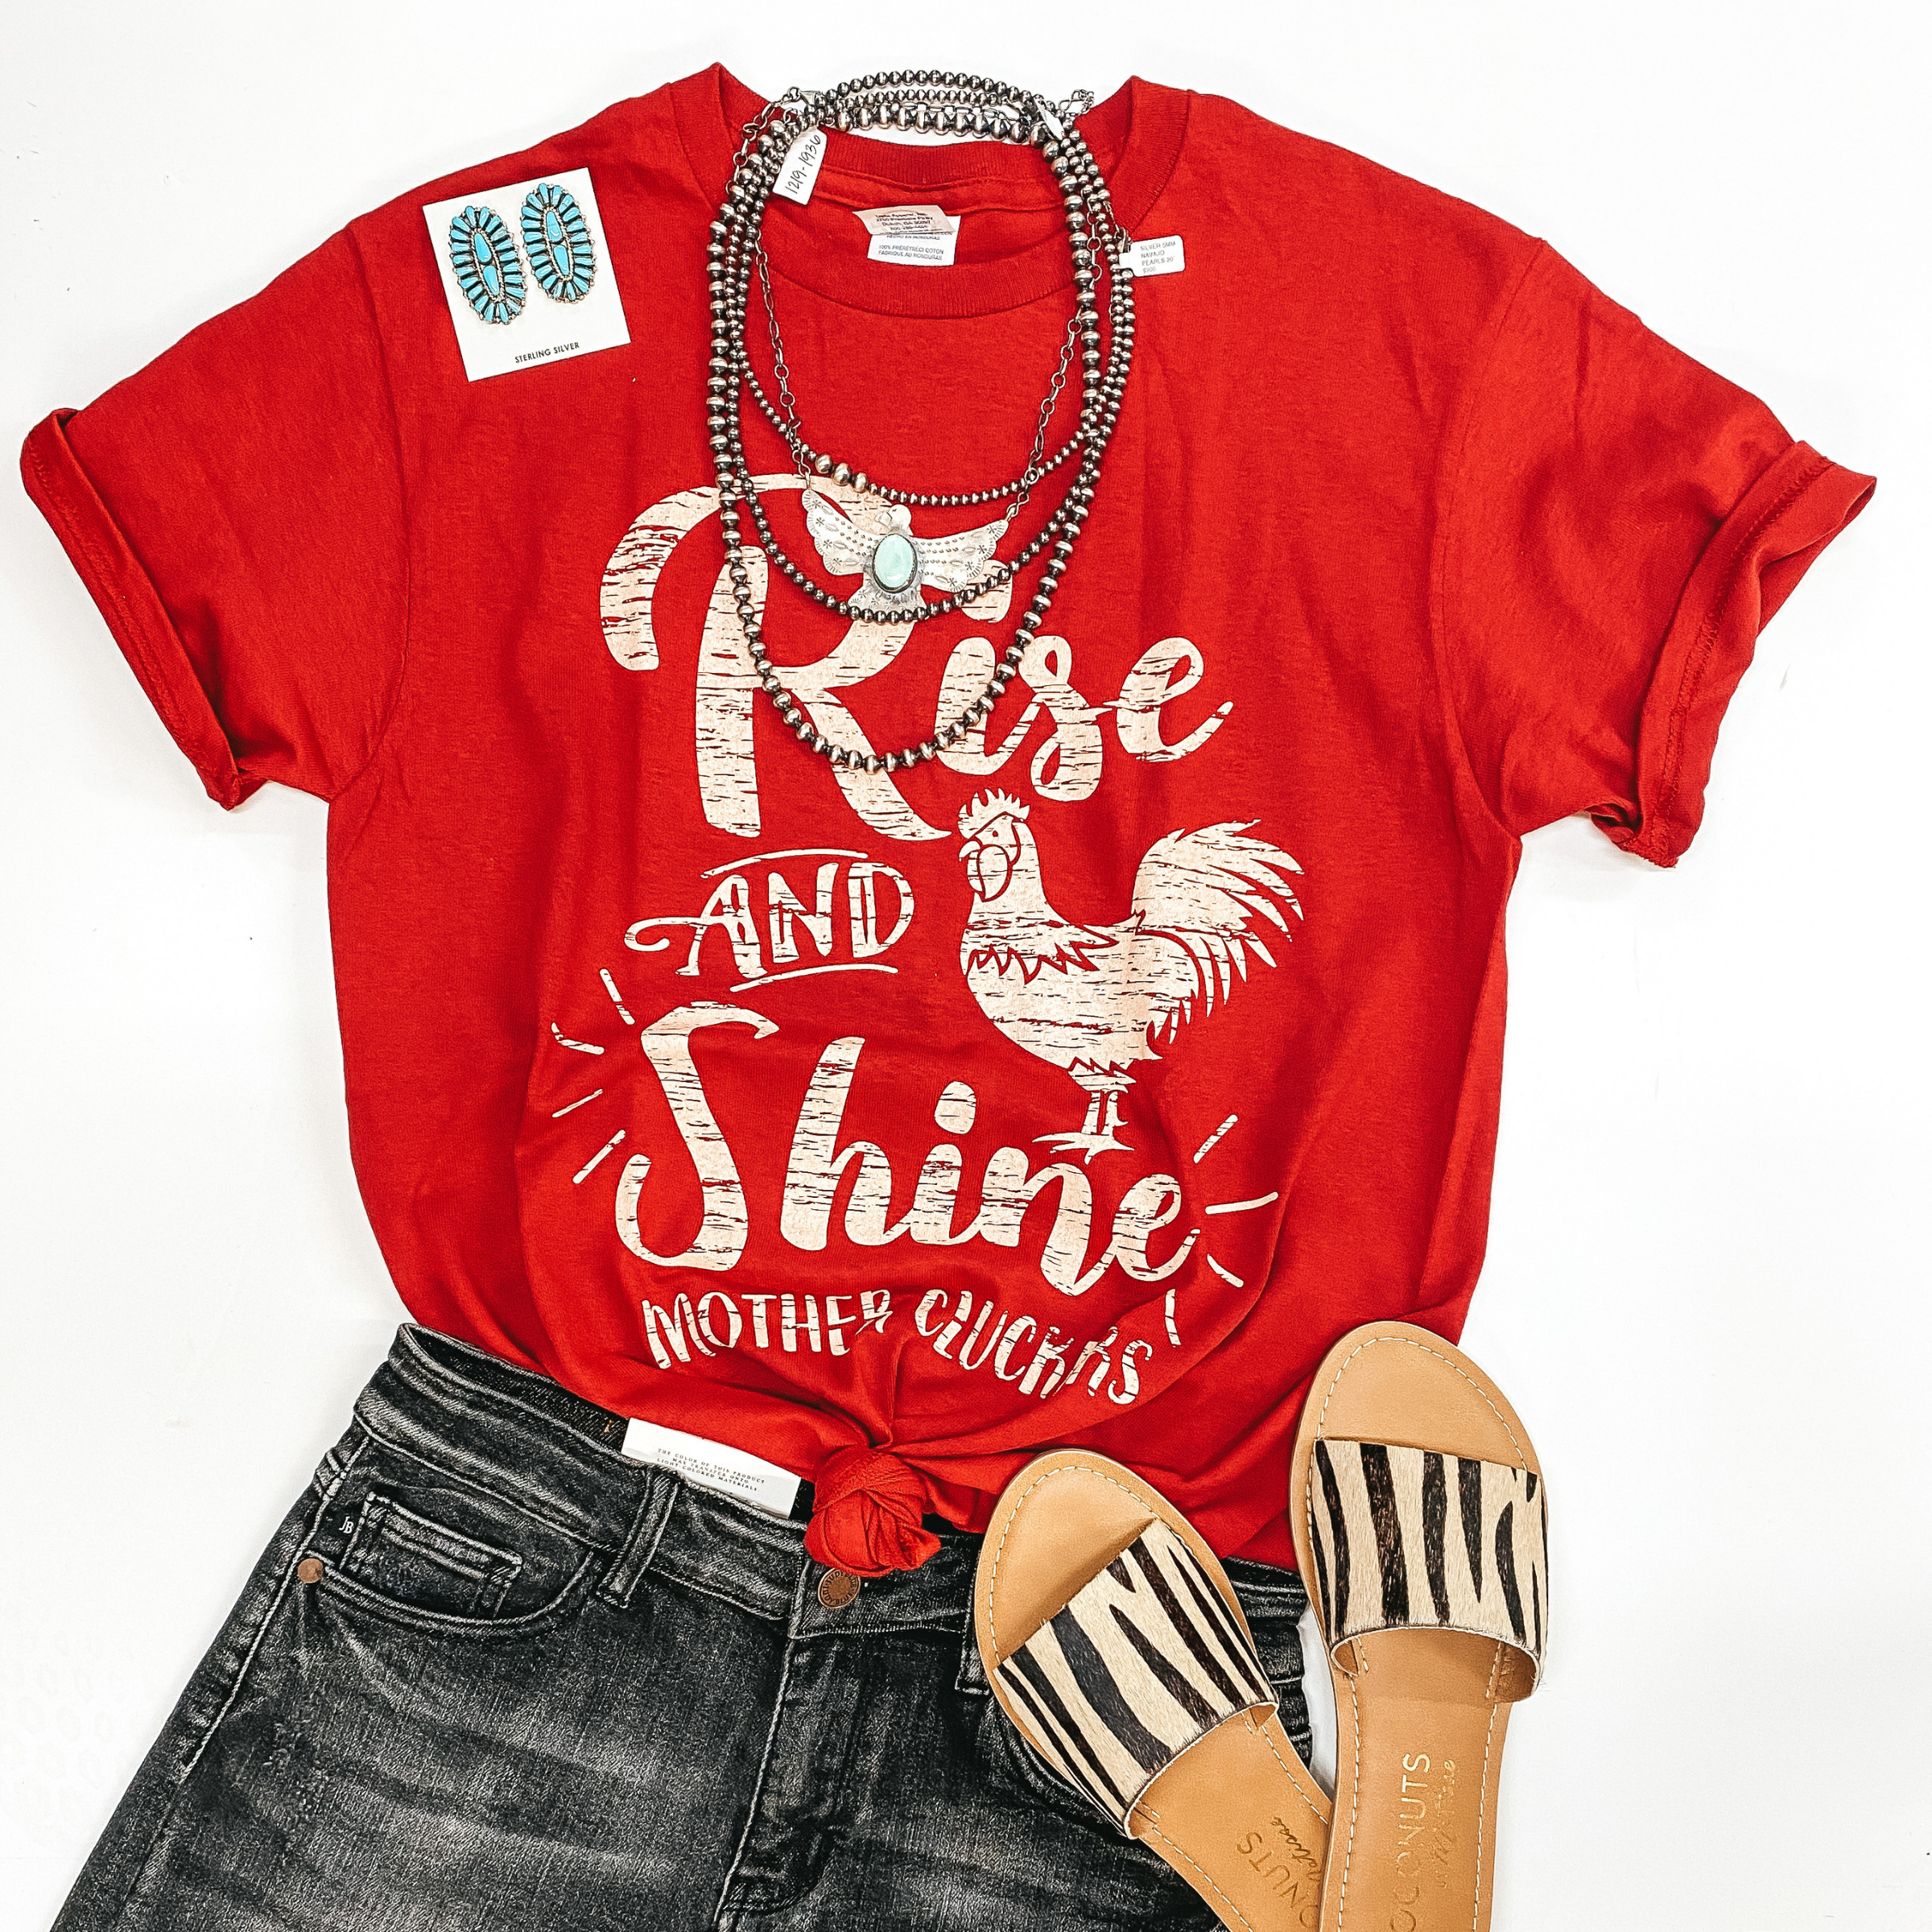 A red graphic tee that says " Rise and shine mother cluckers" with a rooster. Pictured with sandals, black shorts, and genuine Navajo earrings.